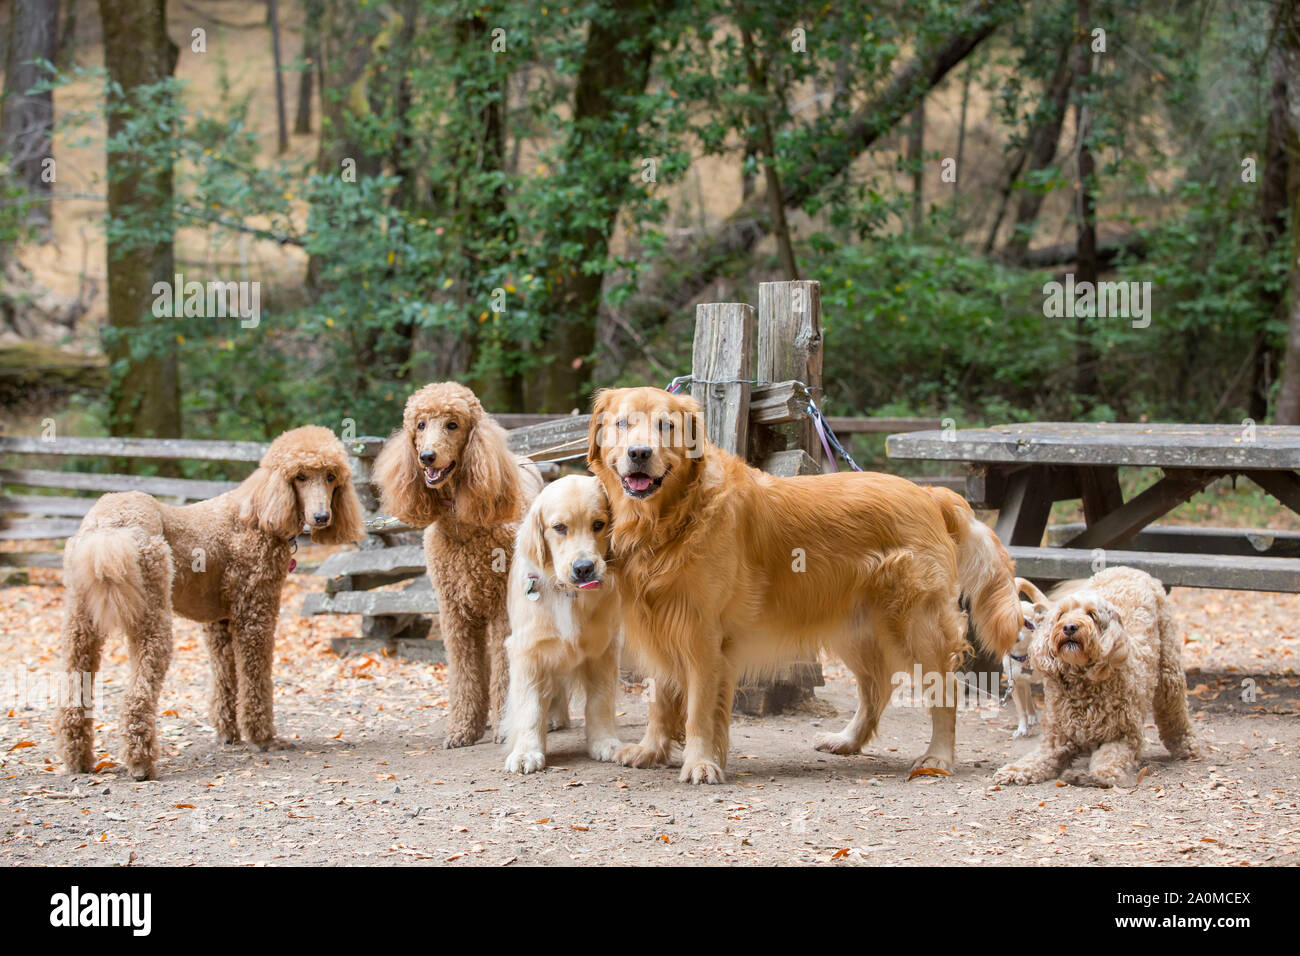 Poodles, Golden Retrievers, and mixed-breed dog on leash in park waiting for dog walker. Stock Photo